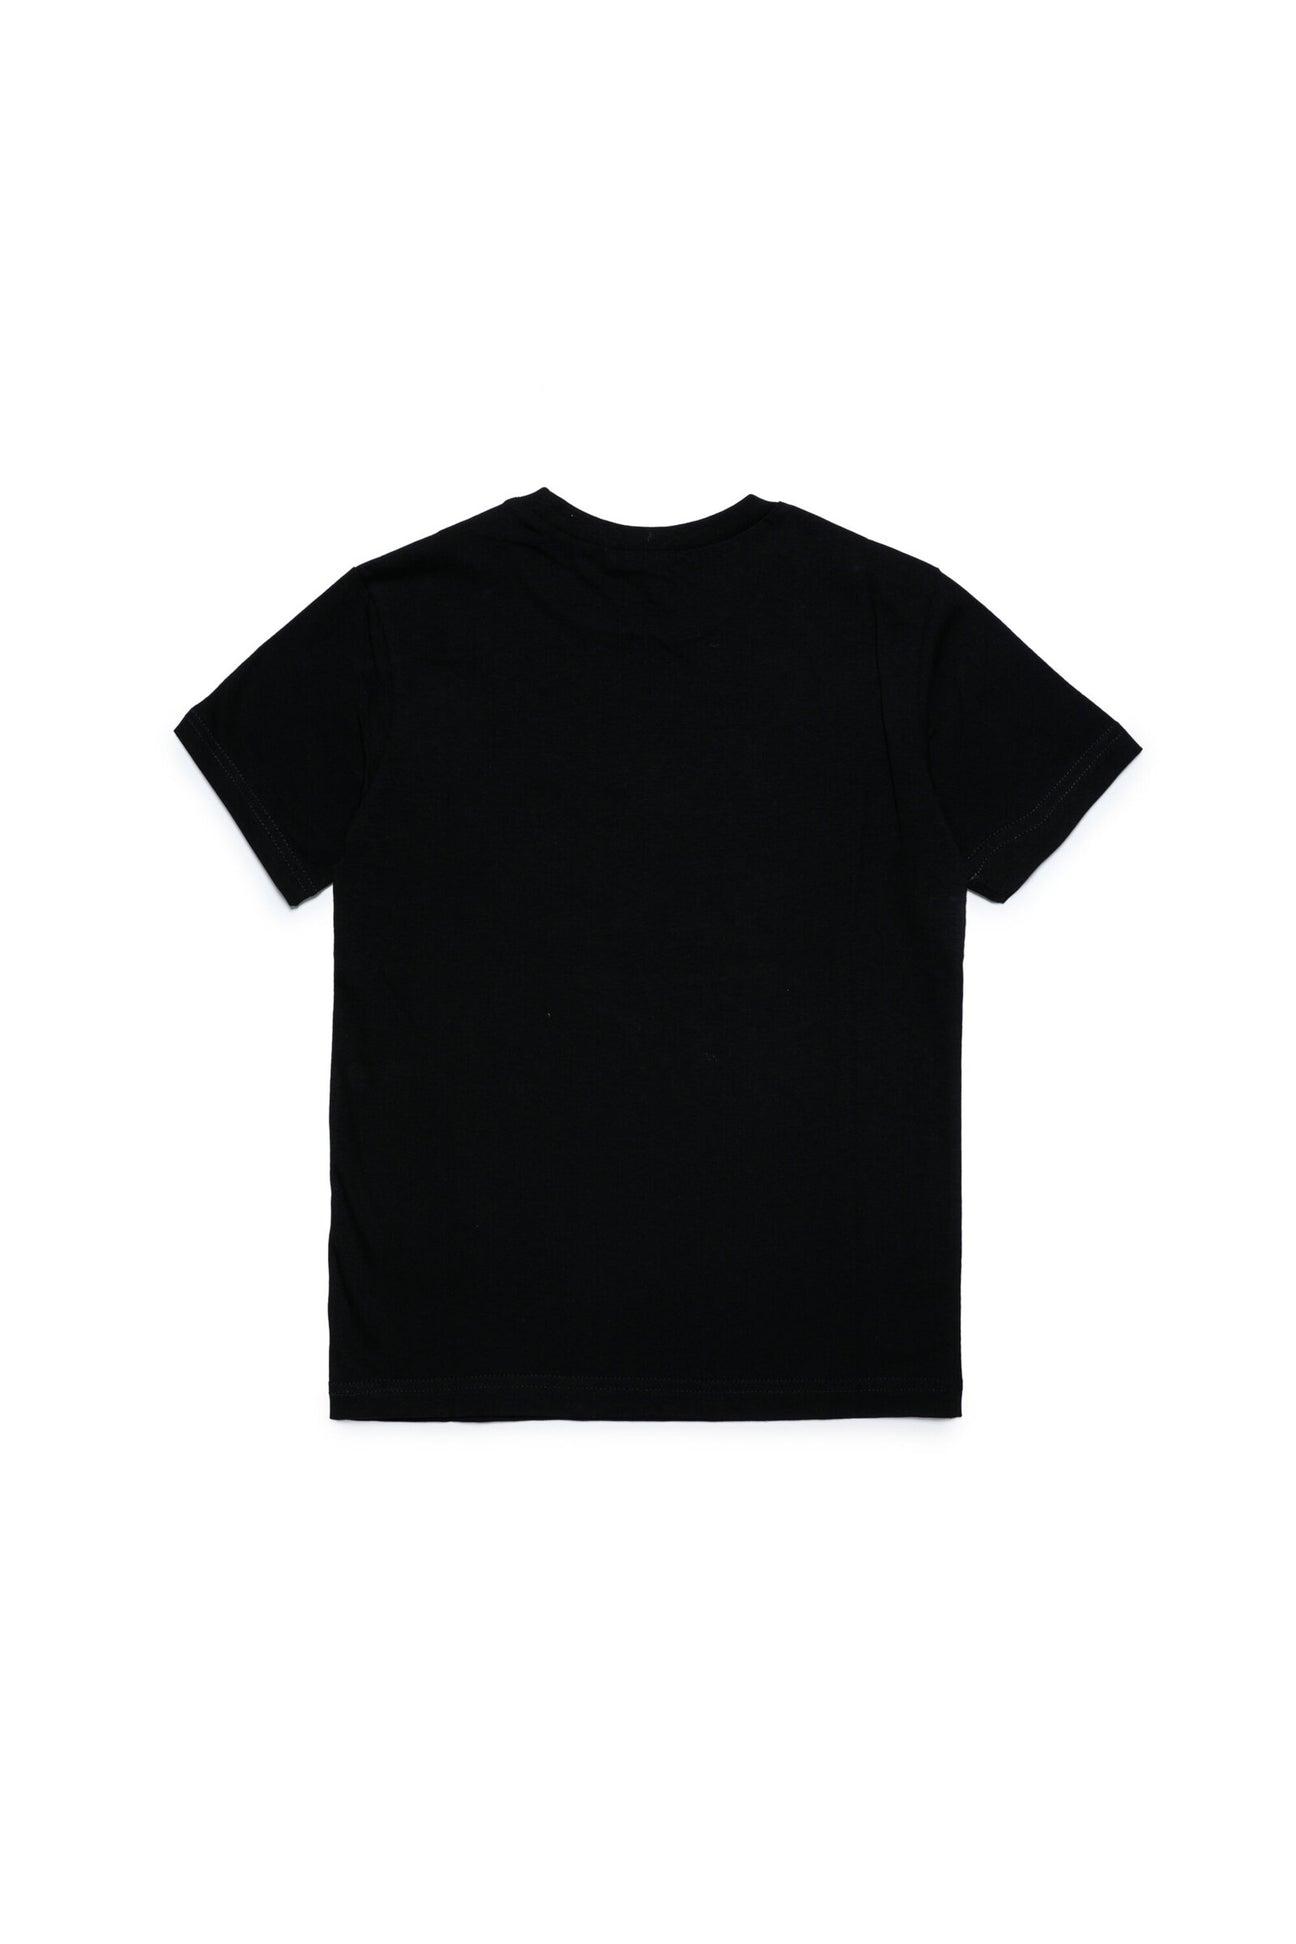 Black jersey t-shirt with logo Black jersey t-shirt with logo